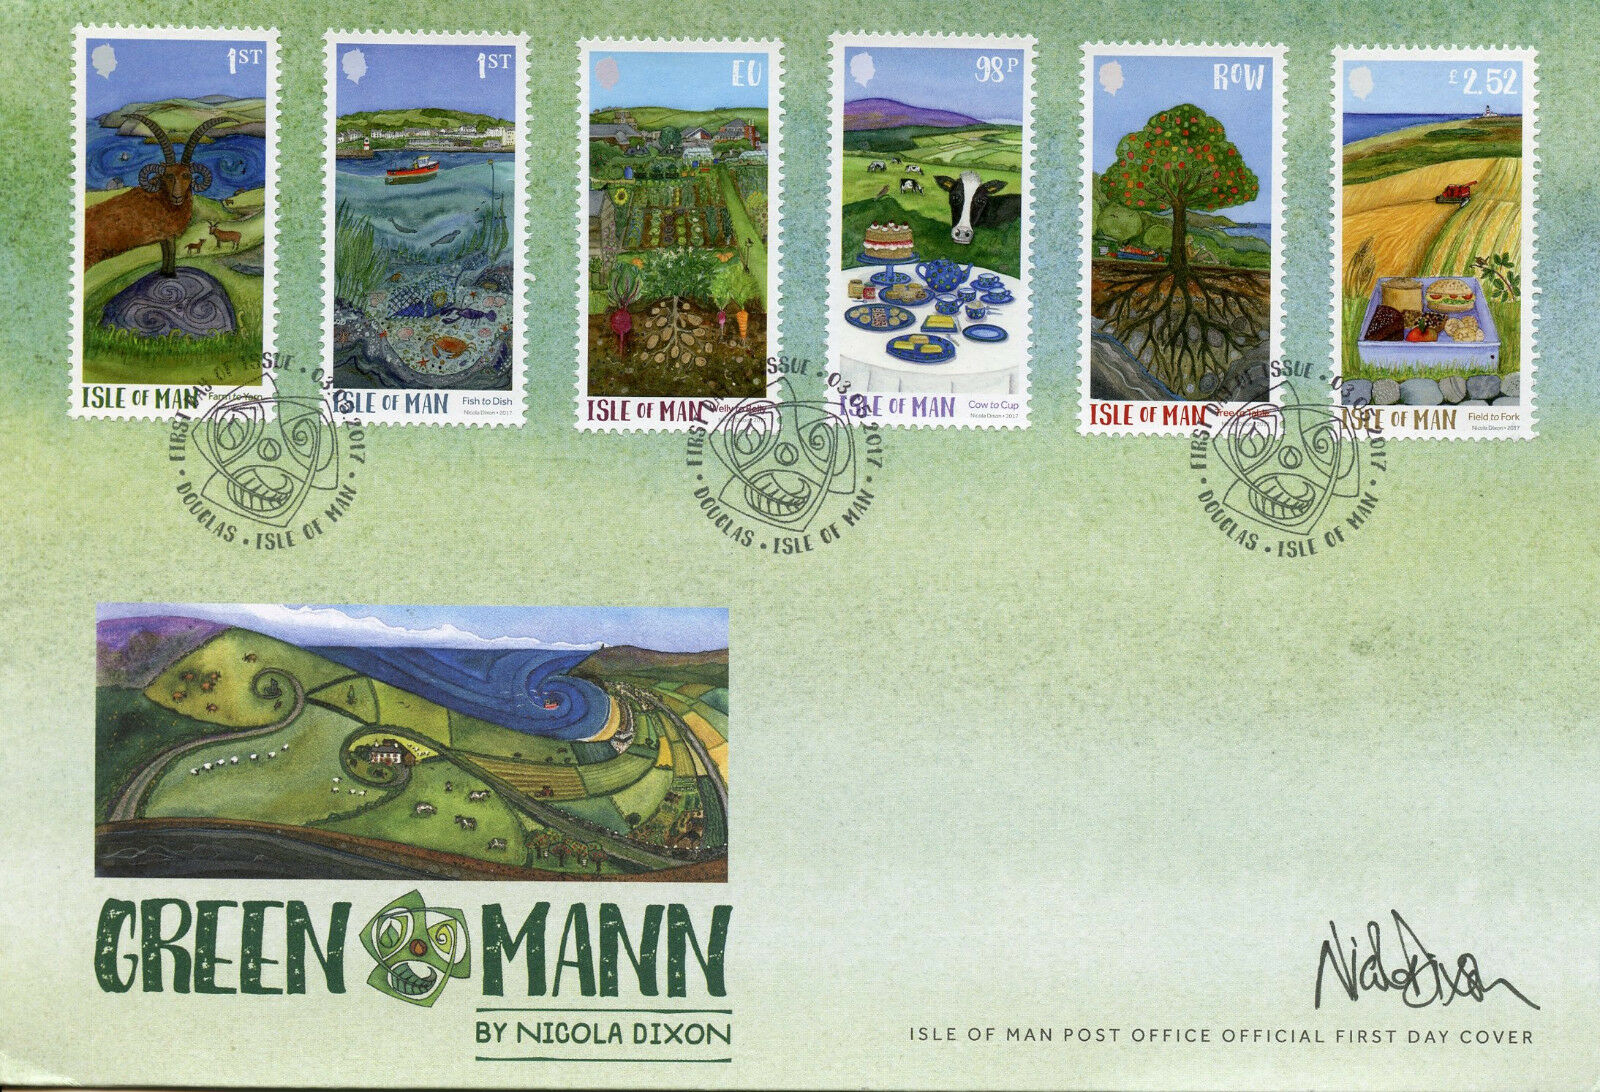 Isle of Man IOM 2017 FDC Green Mann 6v Cover Trees Plants Cows Nature Art Stamps